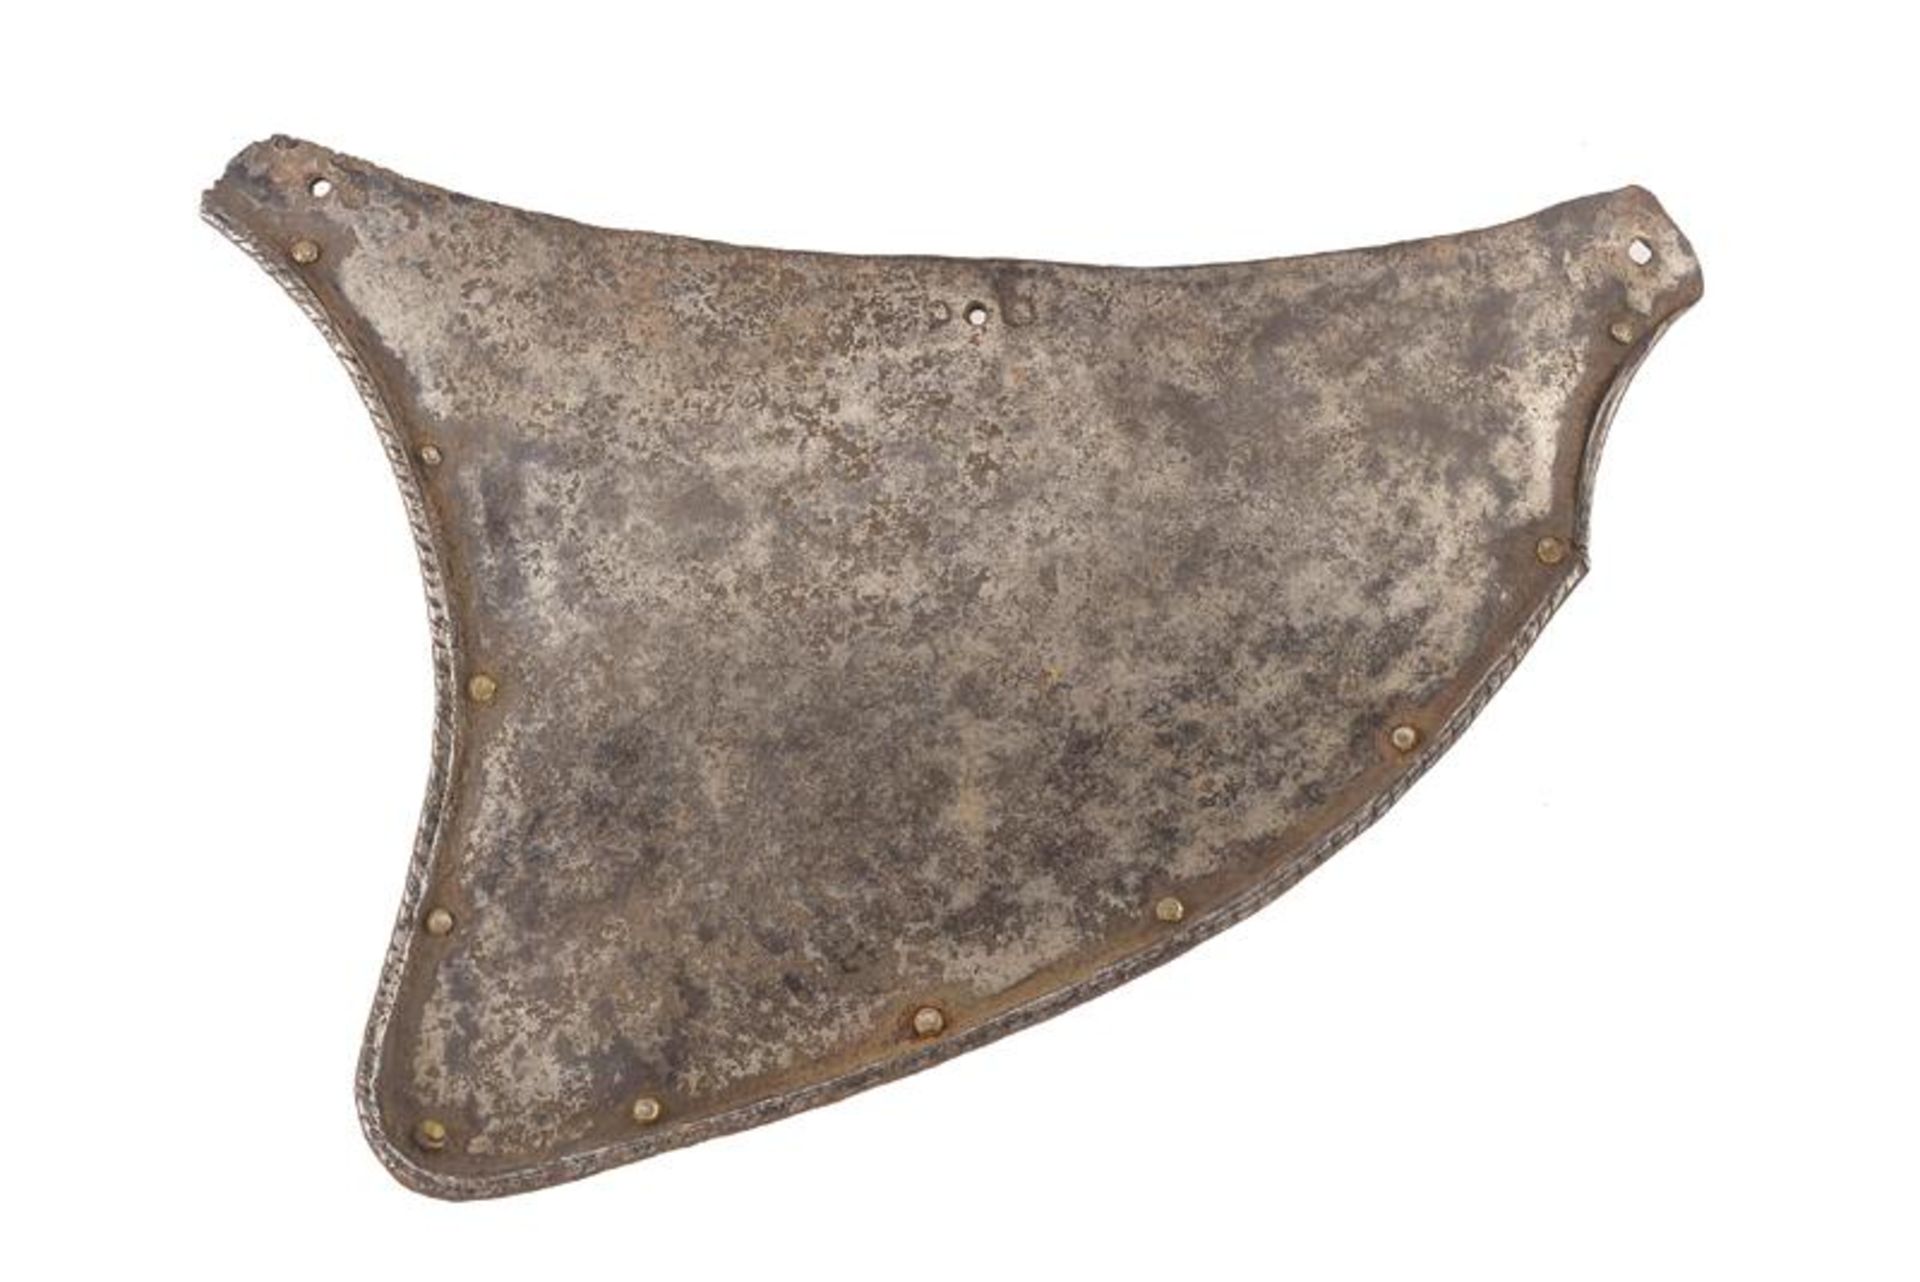 A shoulder protection plate